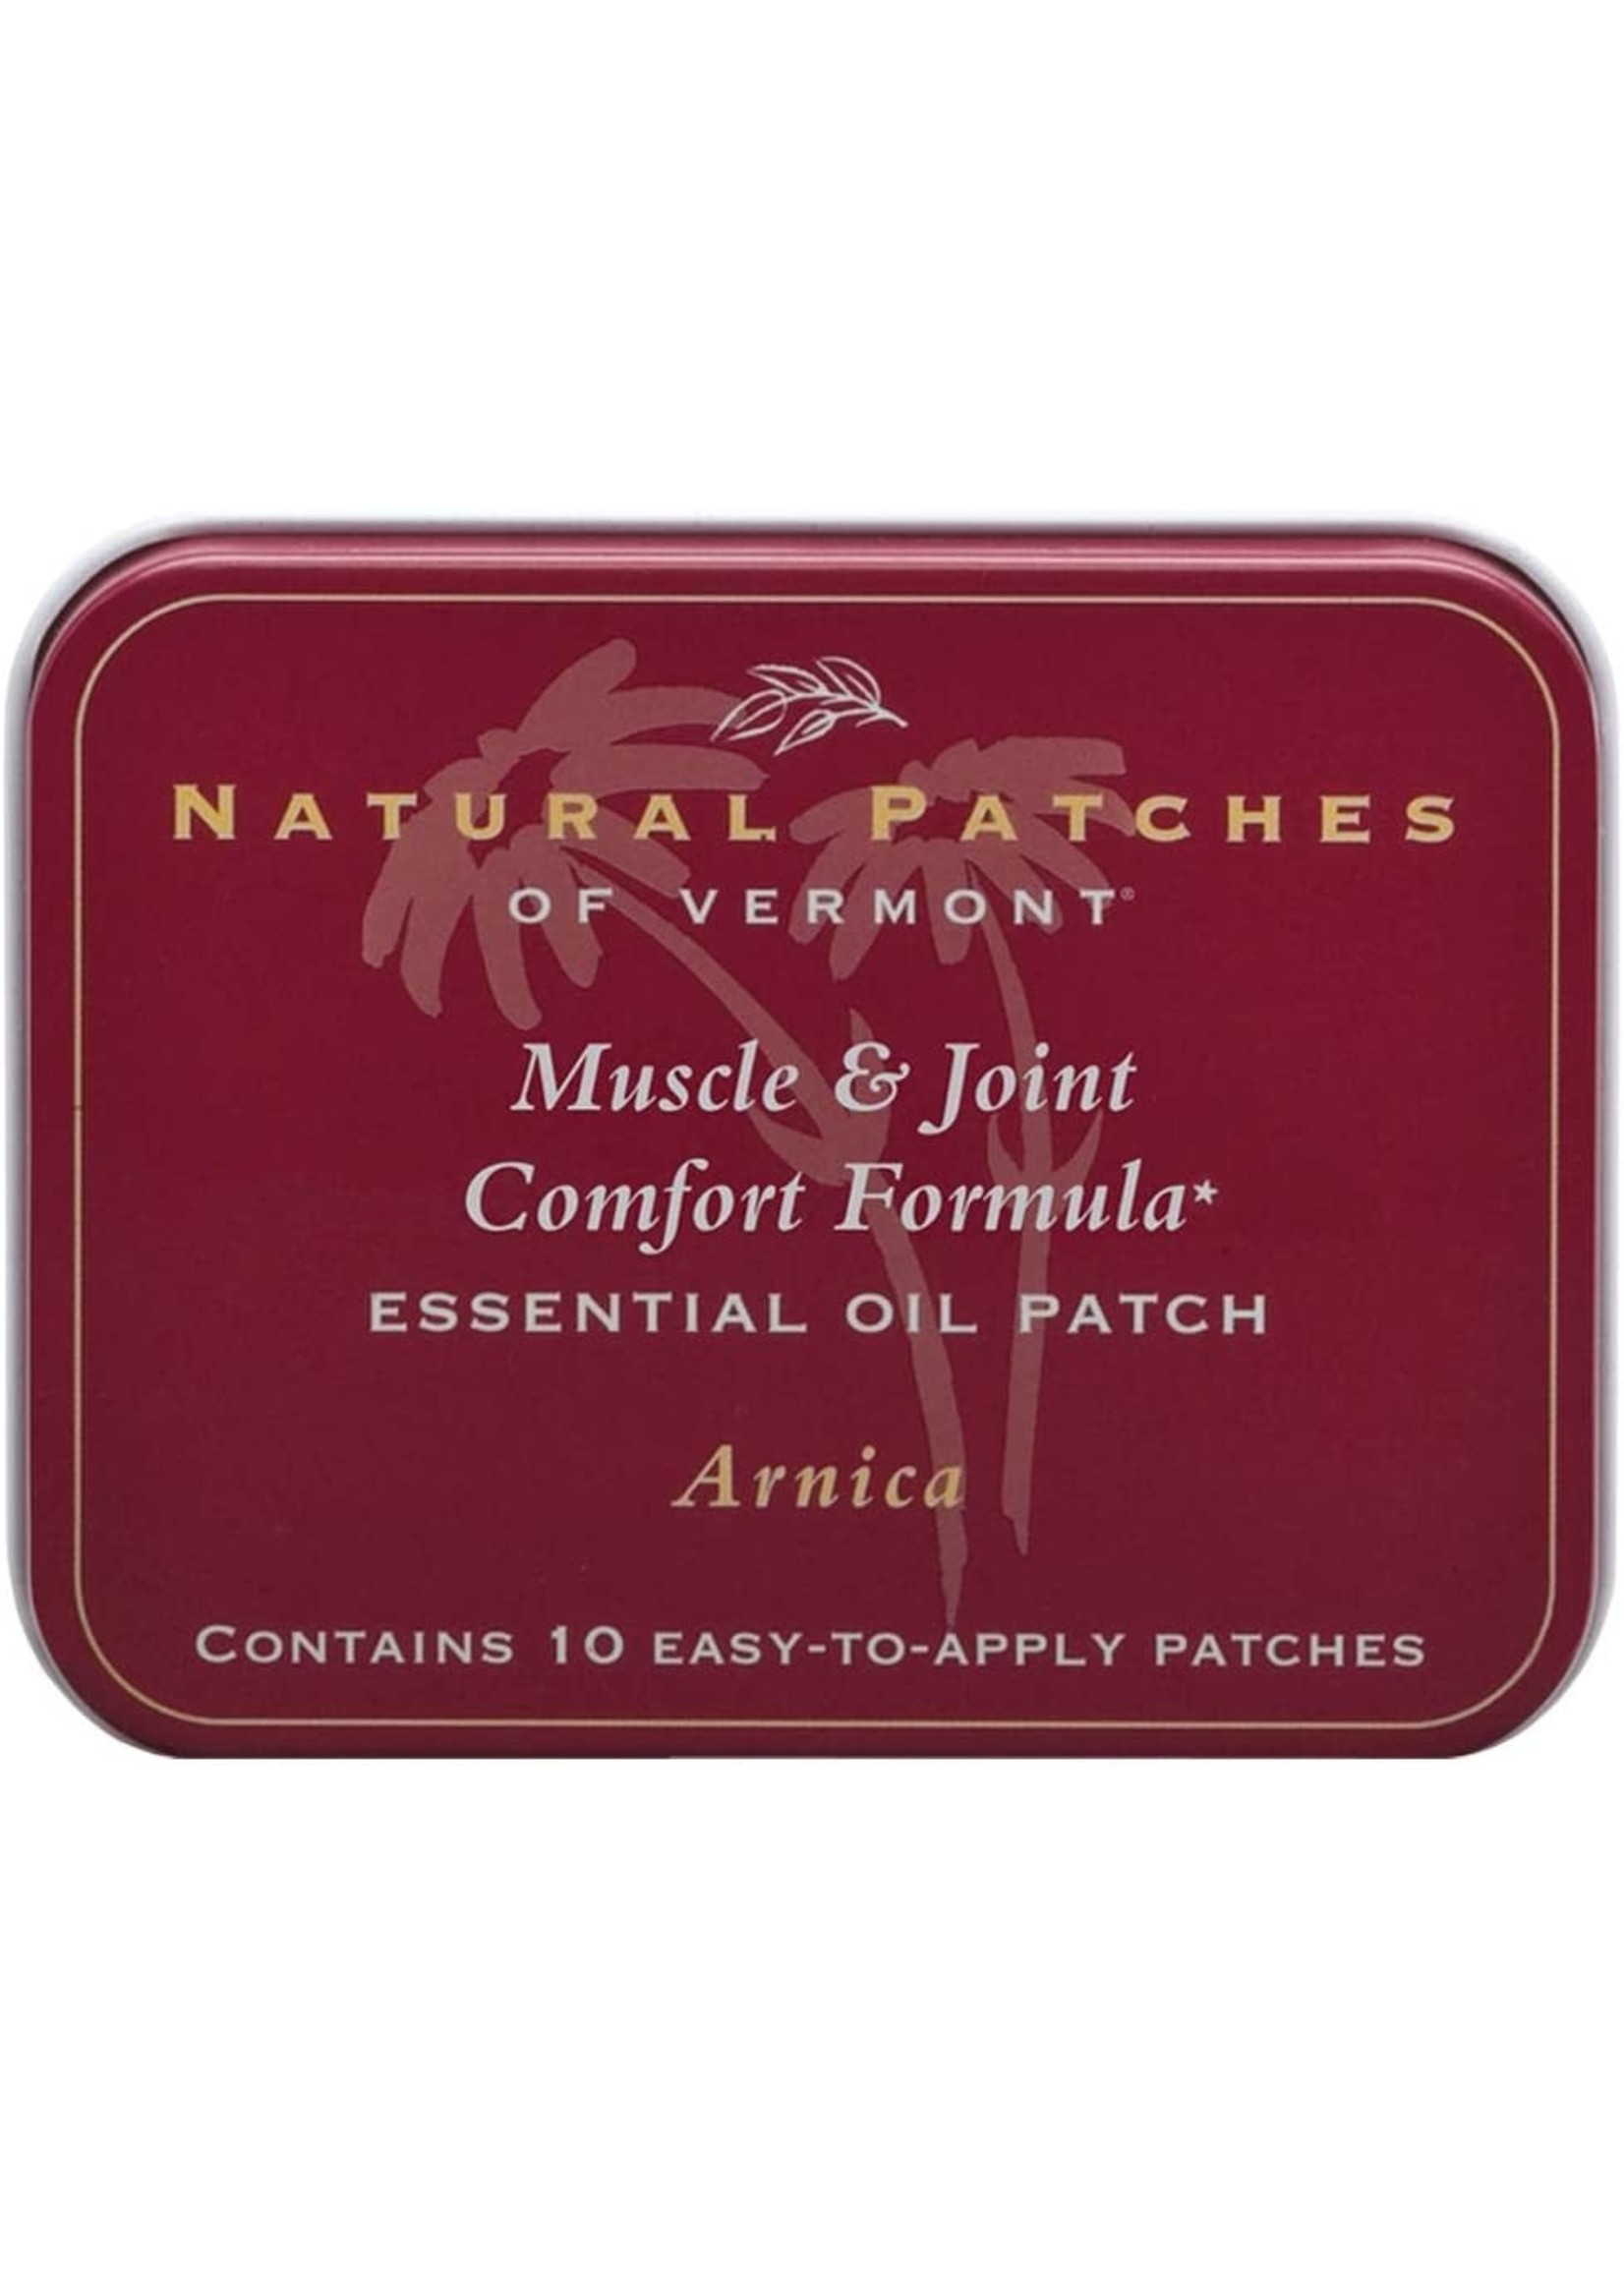 Natural Patches on Vermont